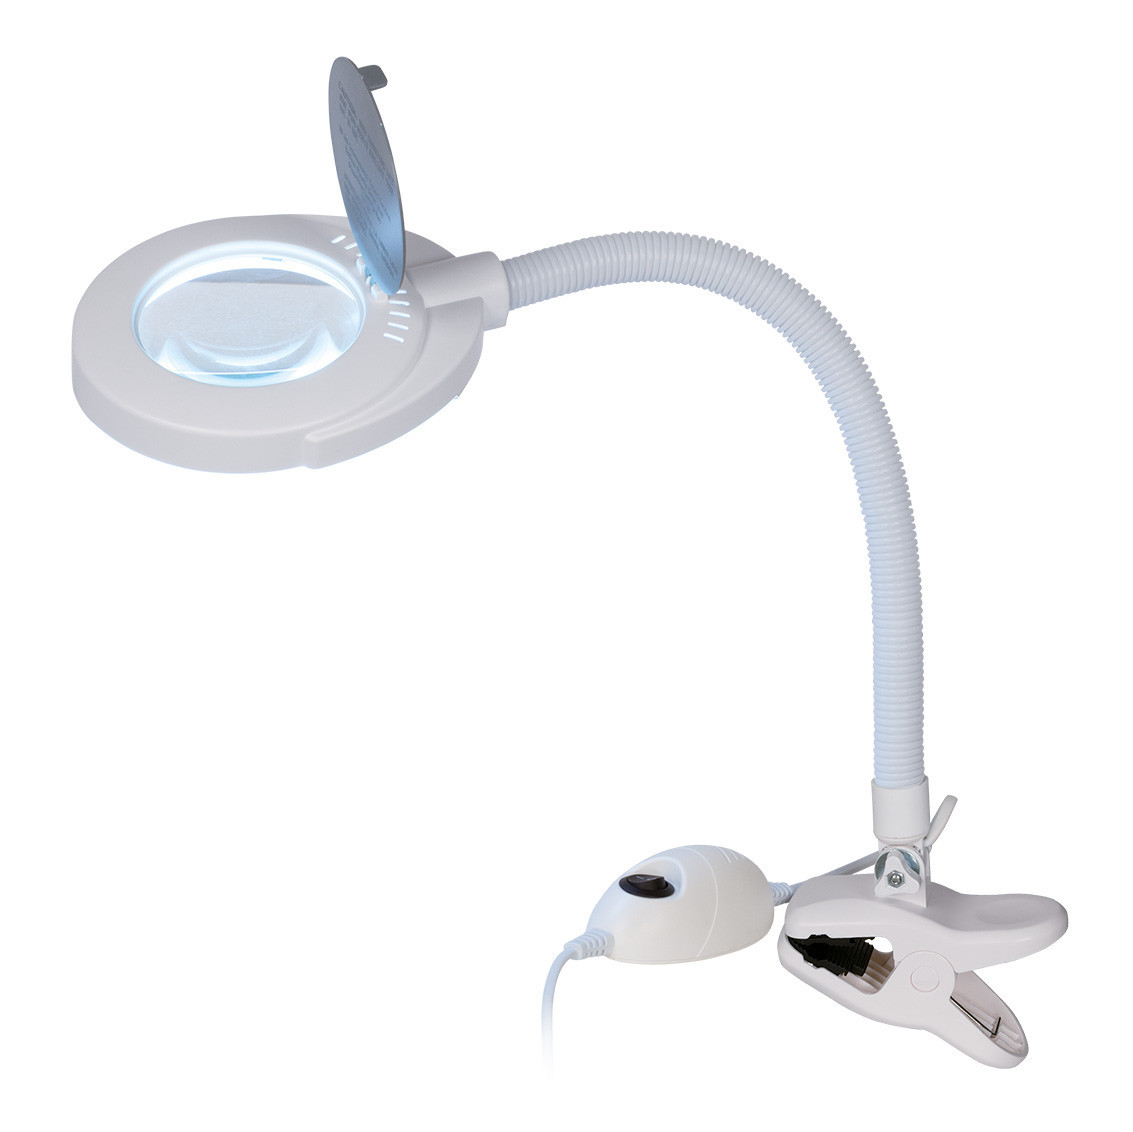 Carrying lamp with LED light and 3-diopter magnifying lens